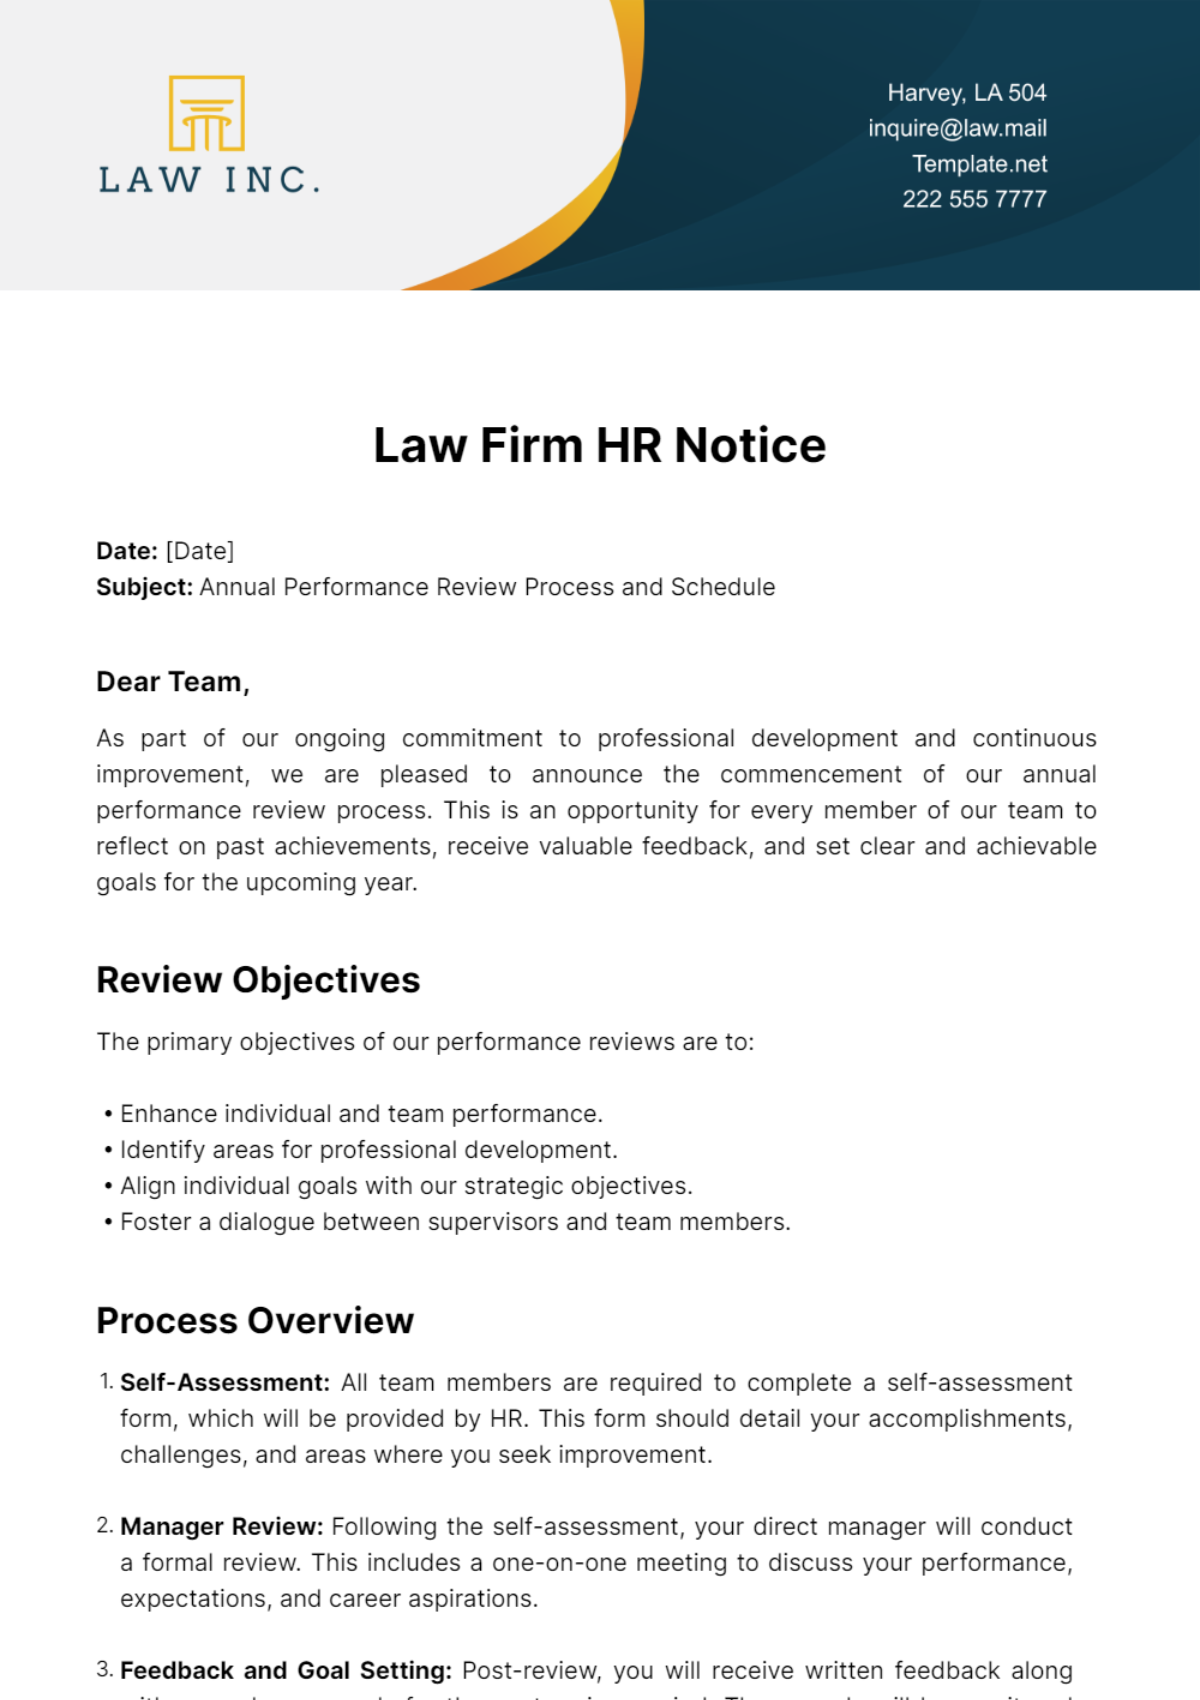 Law Firm HR Notice Template